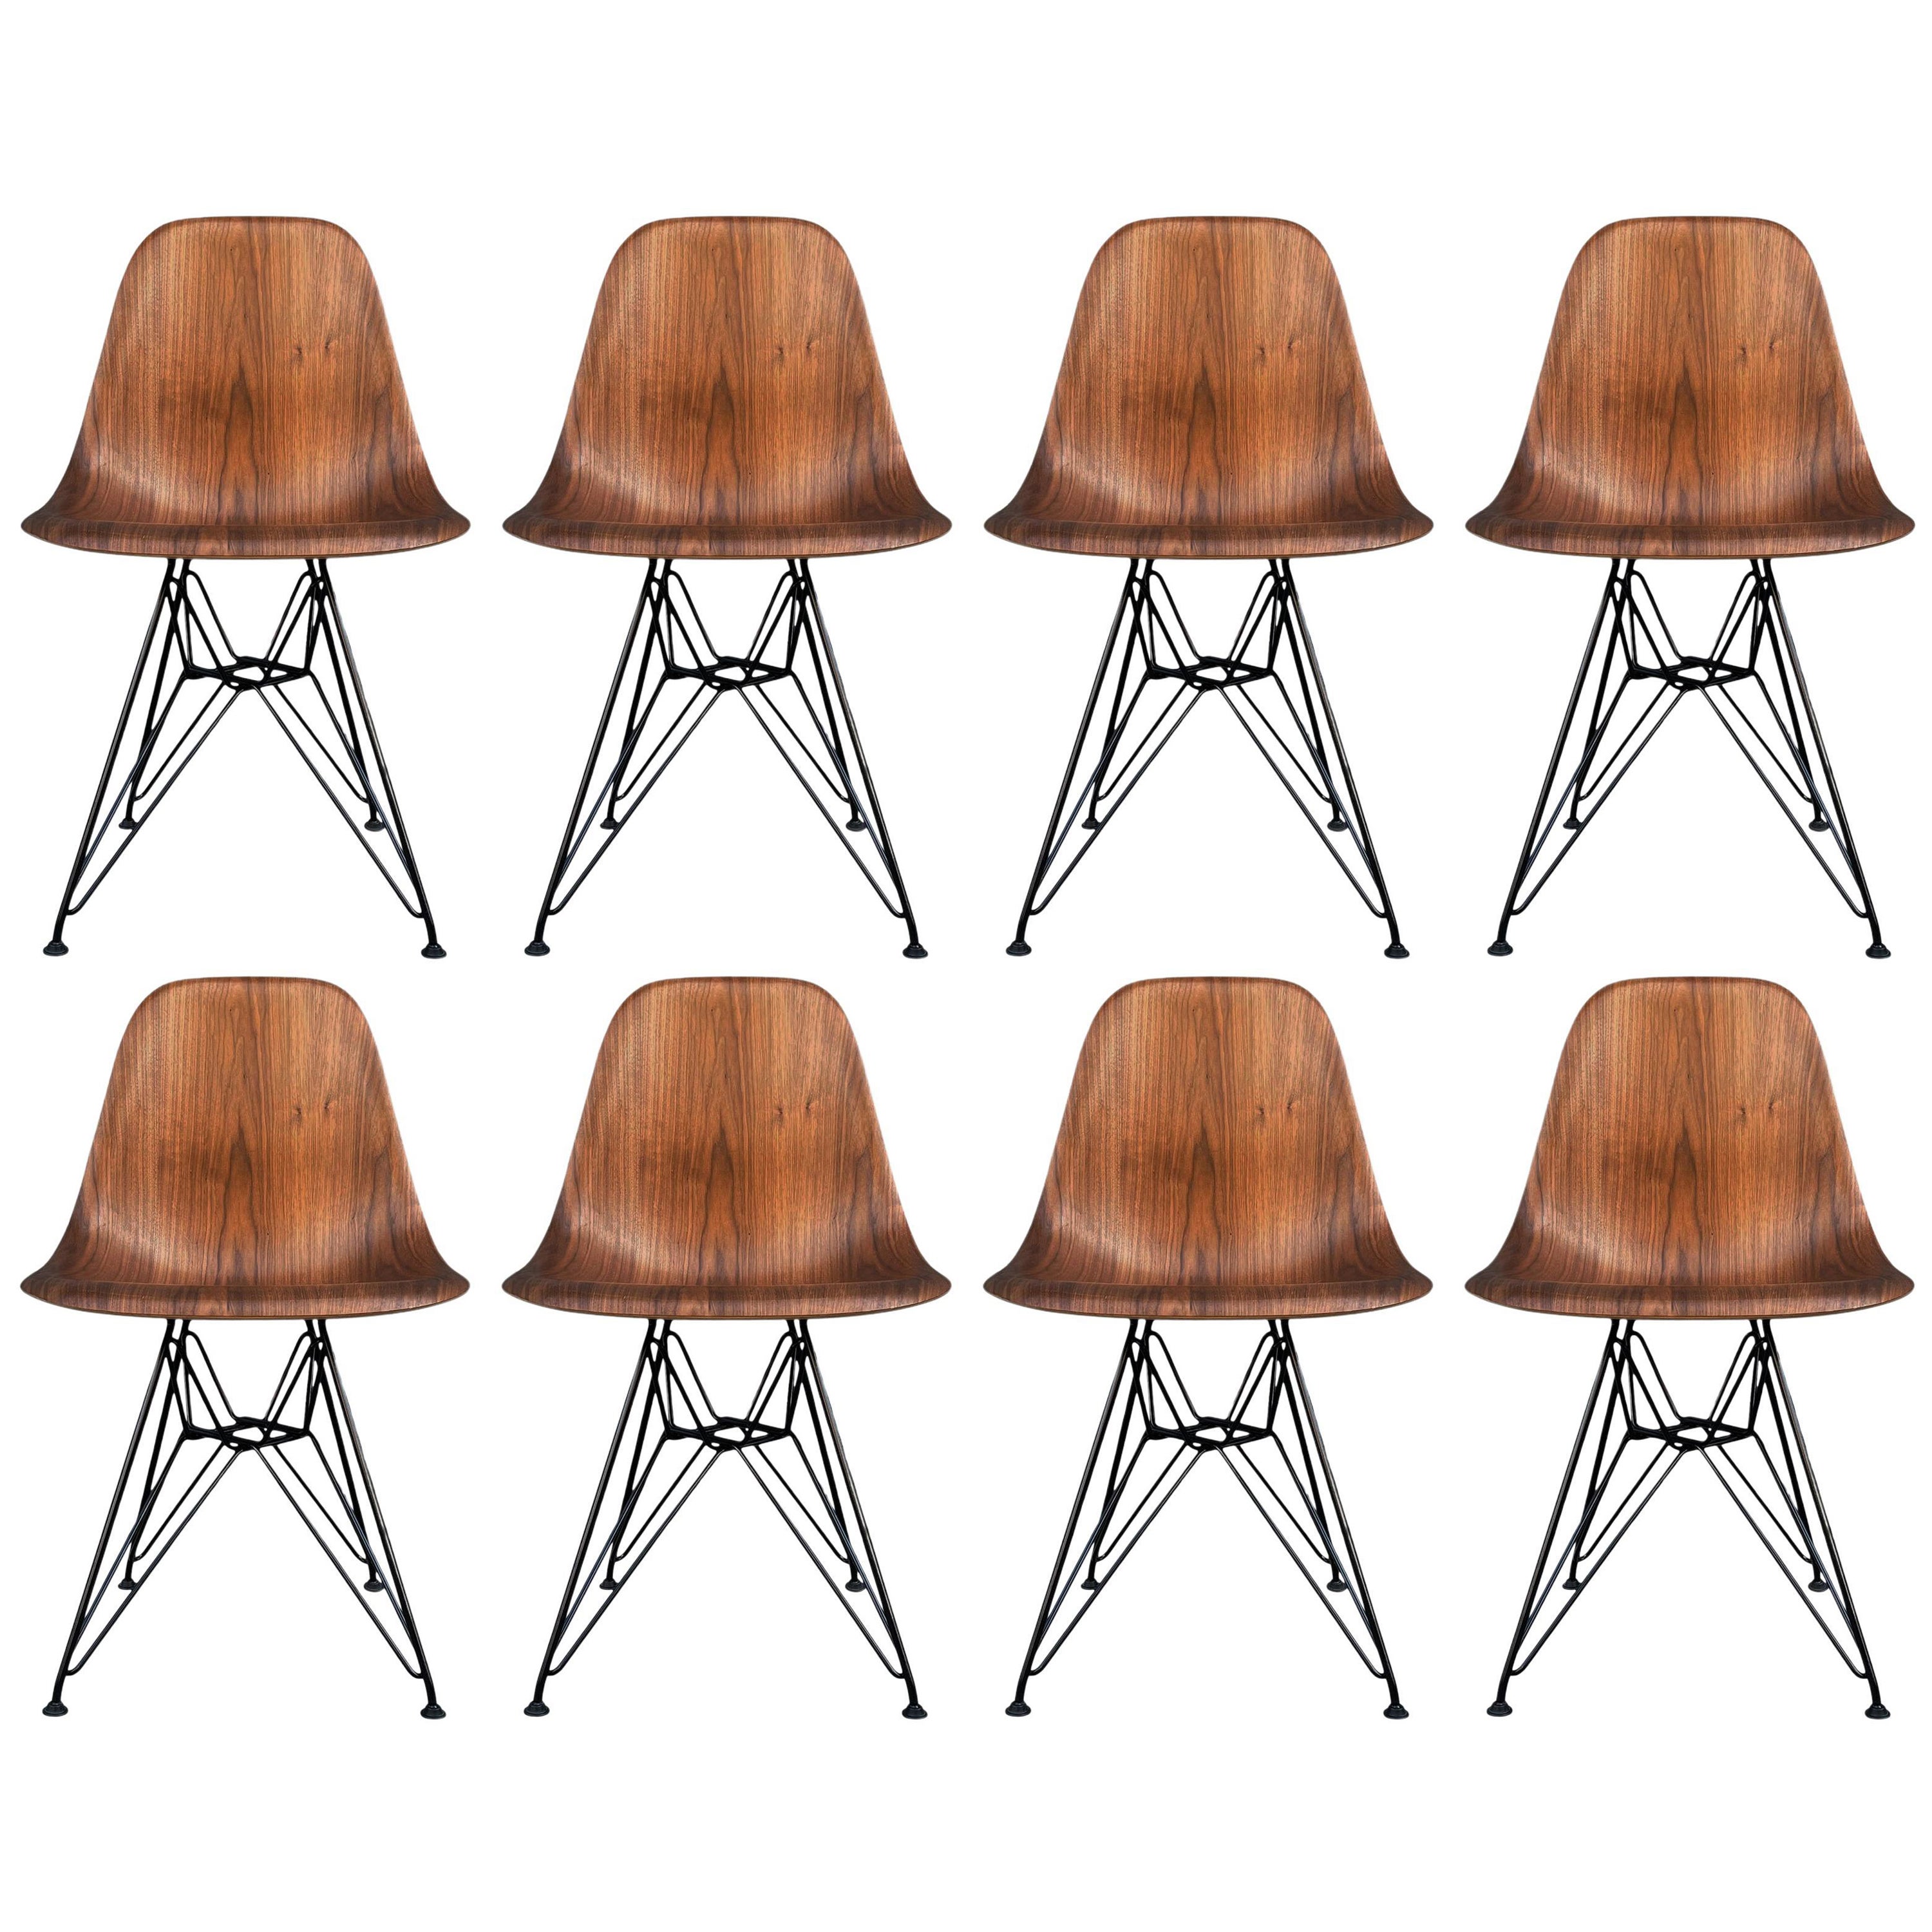 Is Plycraft the same as Eames?